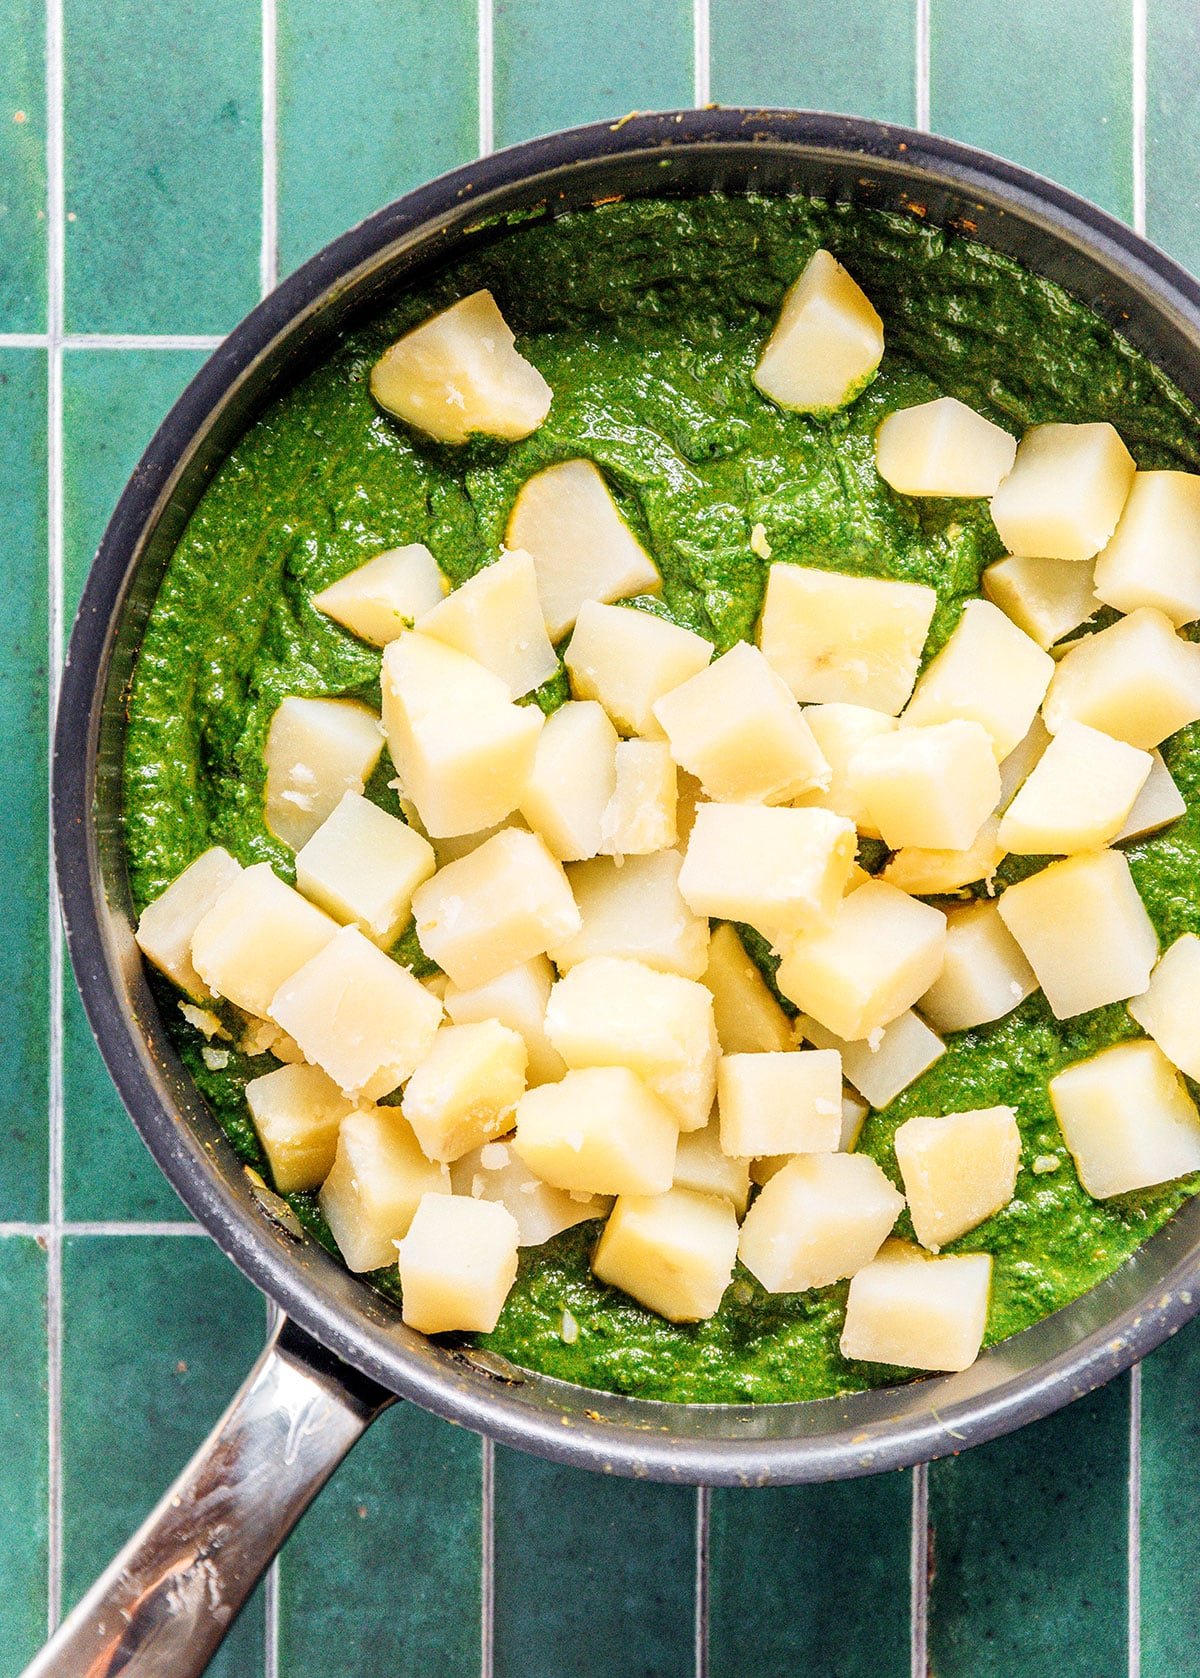 A pot filled with saag aloo green sauce and cubed russet potato